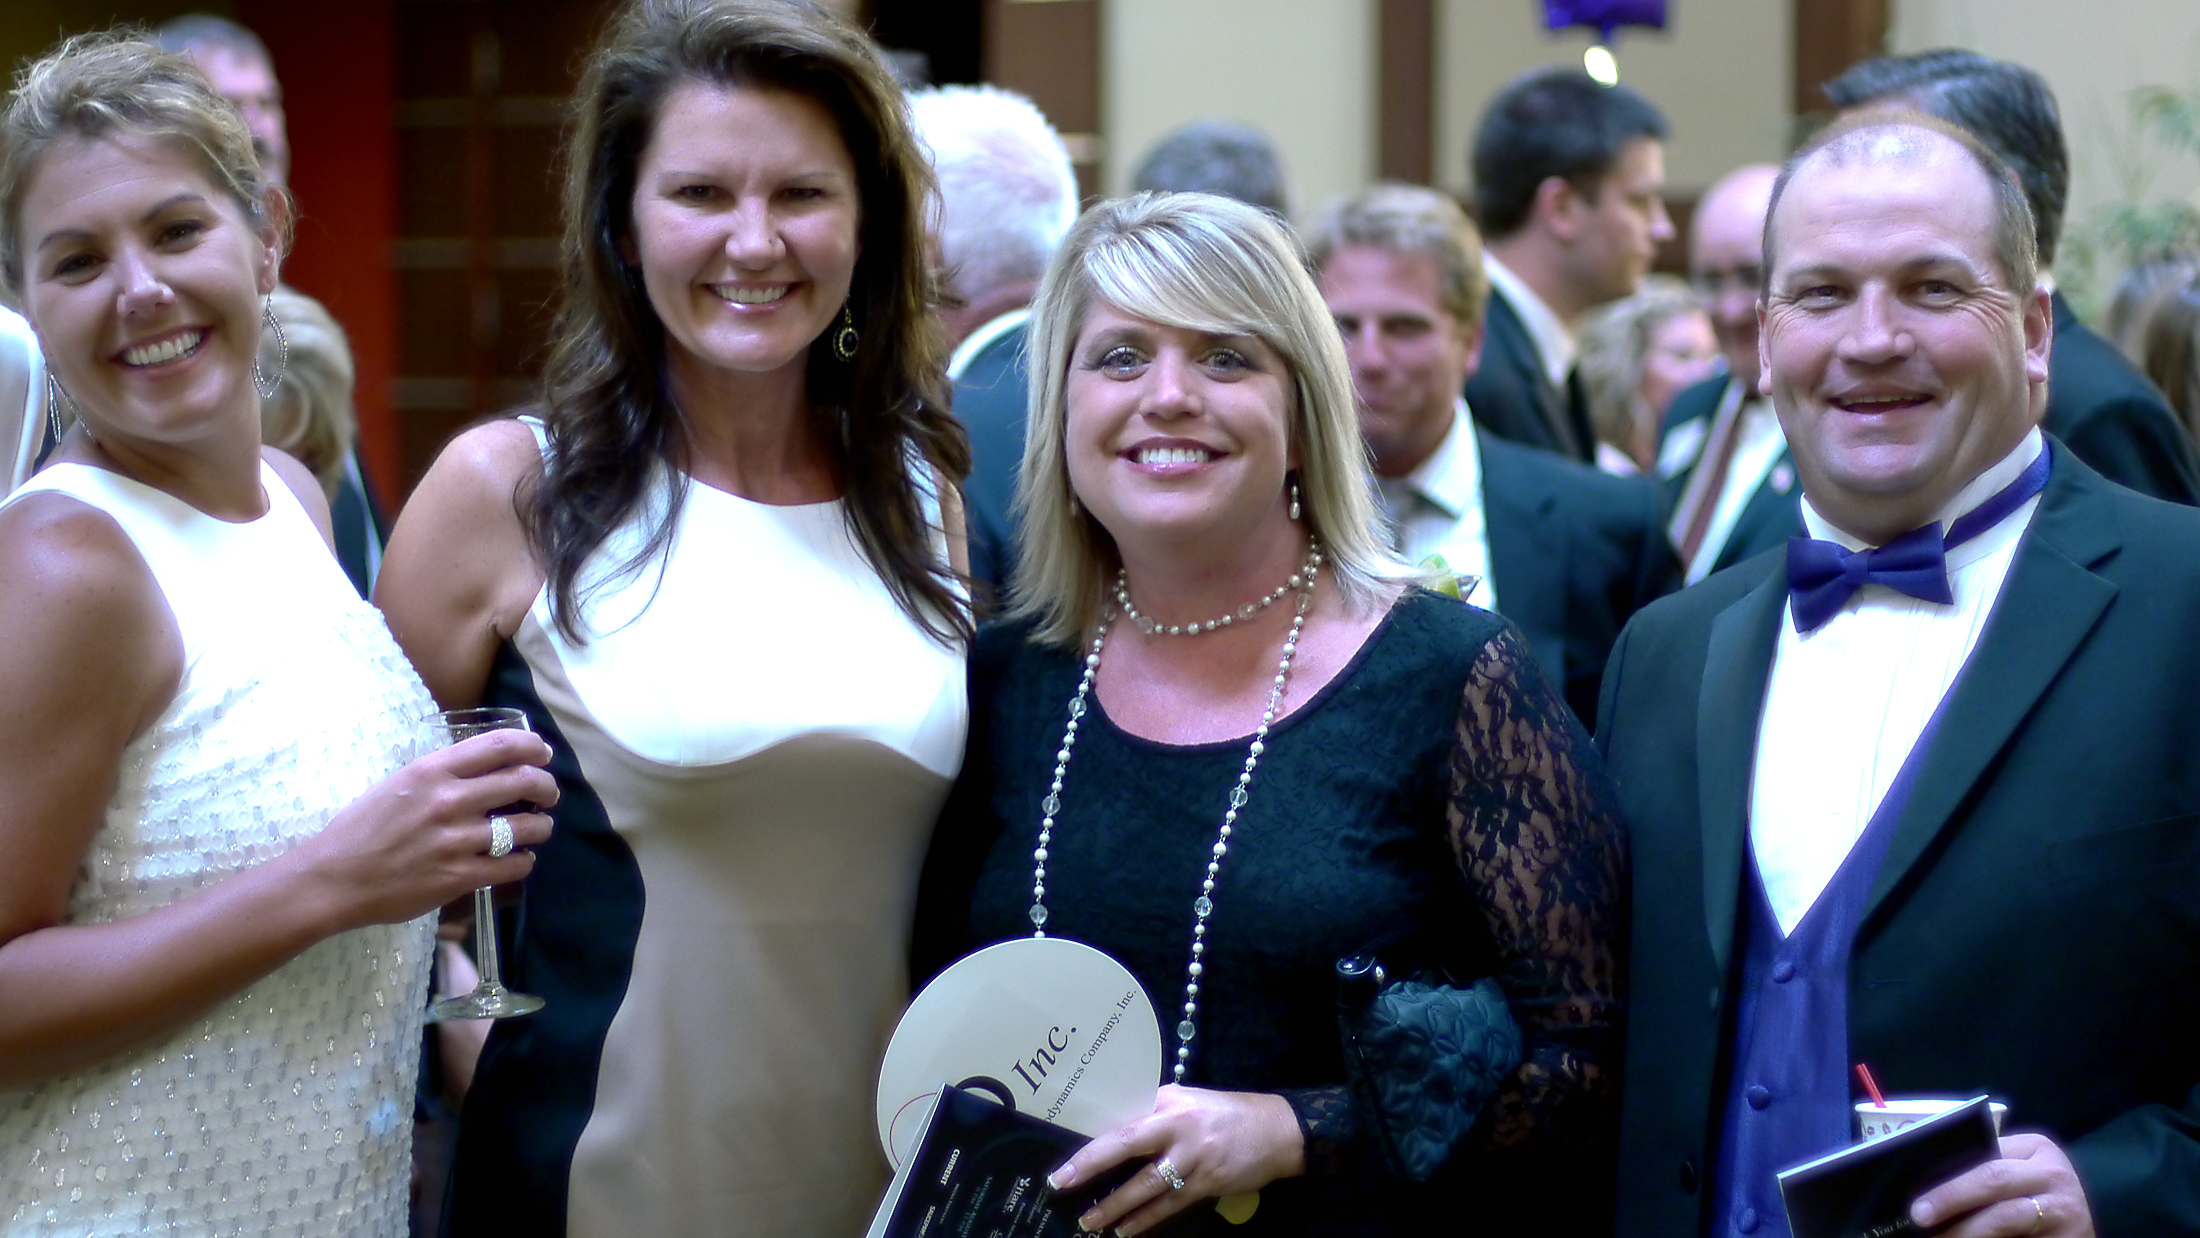 From left: Monica Peck, Trish Crist and Jen and Gary Deakyne enjoy last year’s gala benefiting Prevail. The 2013 event raised $140,000 for Prevail programs that served more than 3,000 victims of crime and abuse. (Submitted photo)